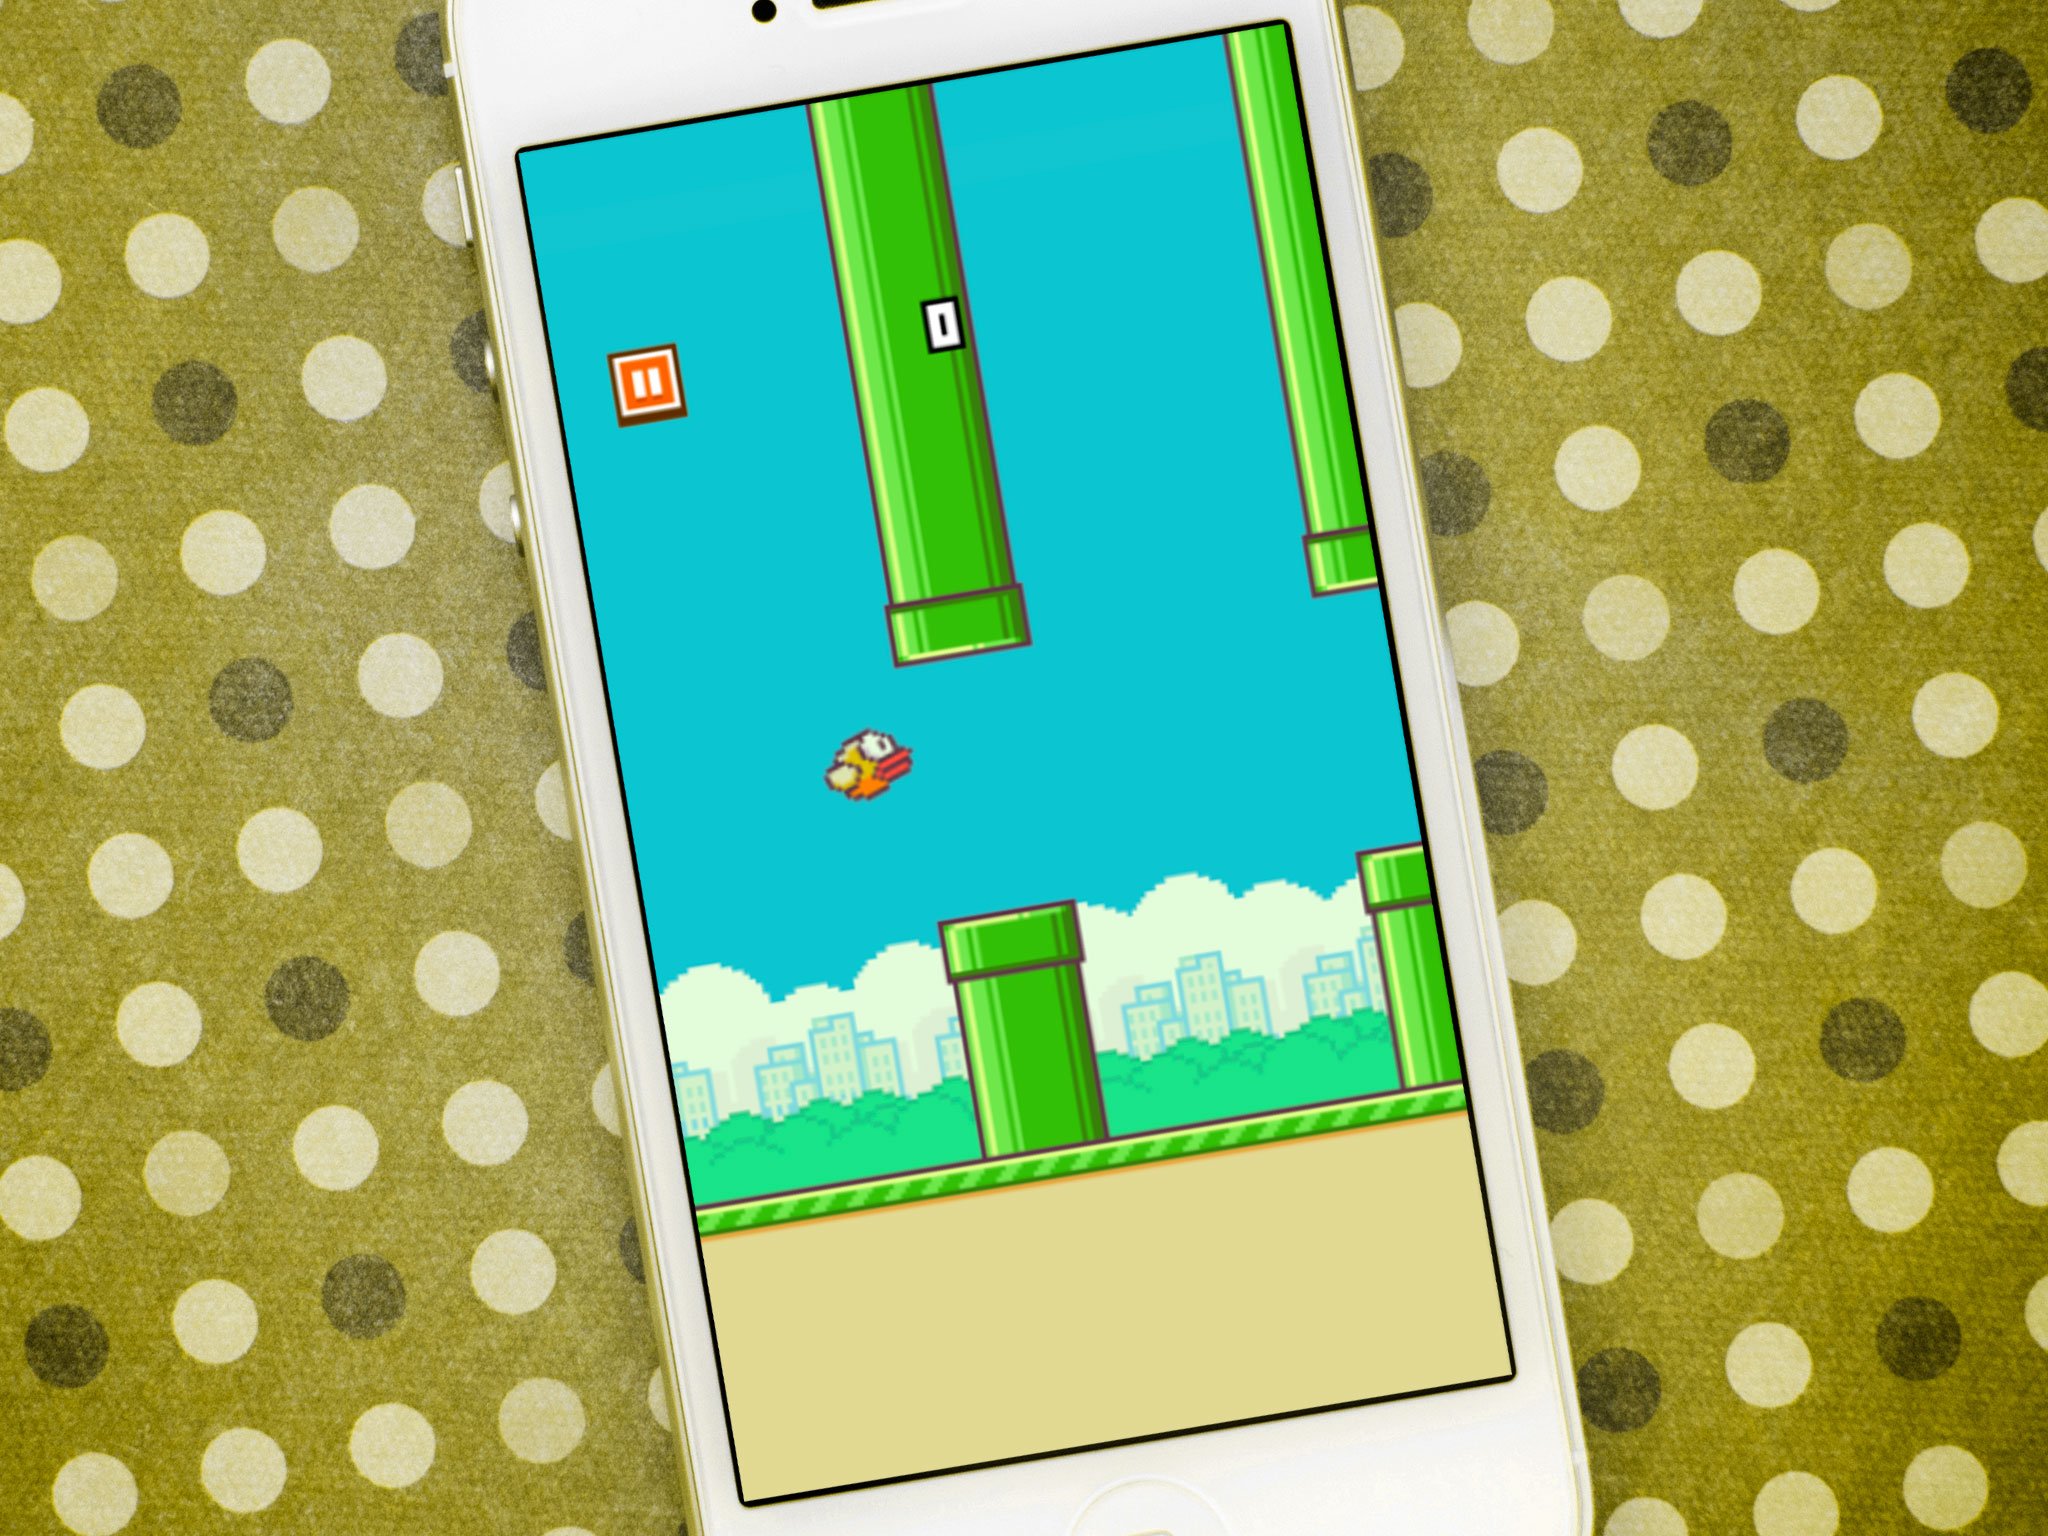 Flappy Wings: What's your high score?